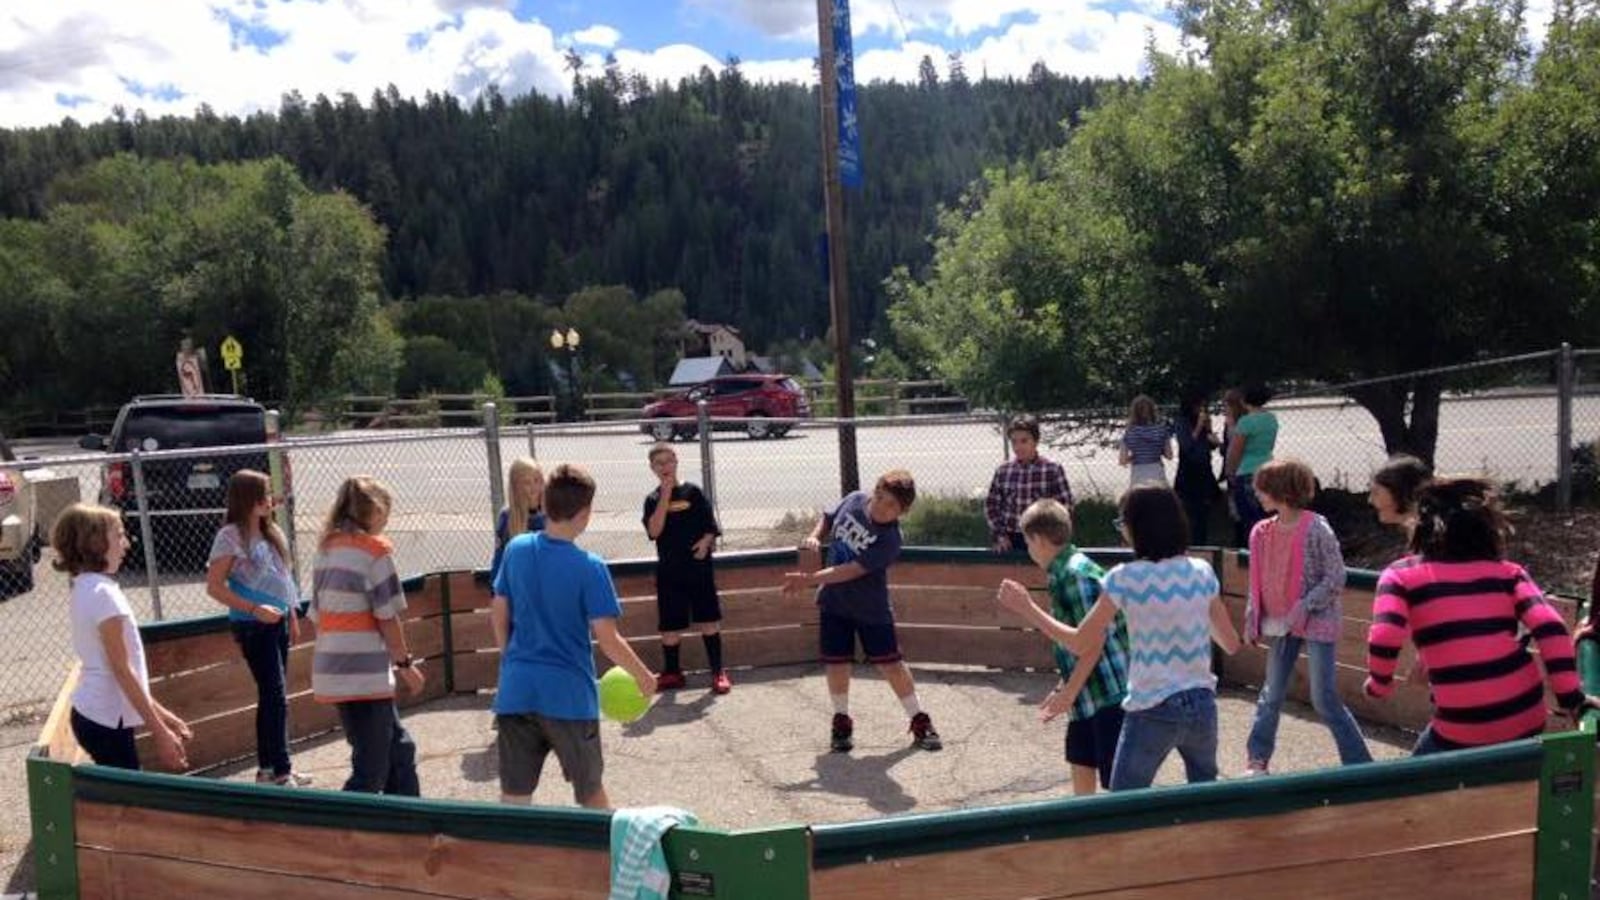 Pagosa Springs Middle School purchased this gaga pit— used to play a fast-paced version of dodgeball—using money from its Healthy School Champion awards.